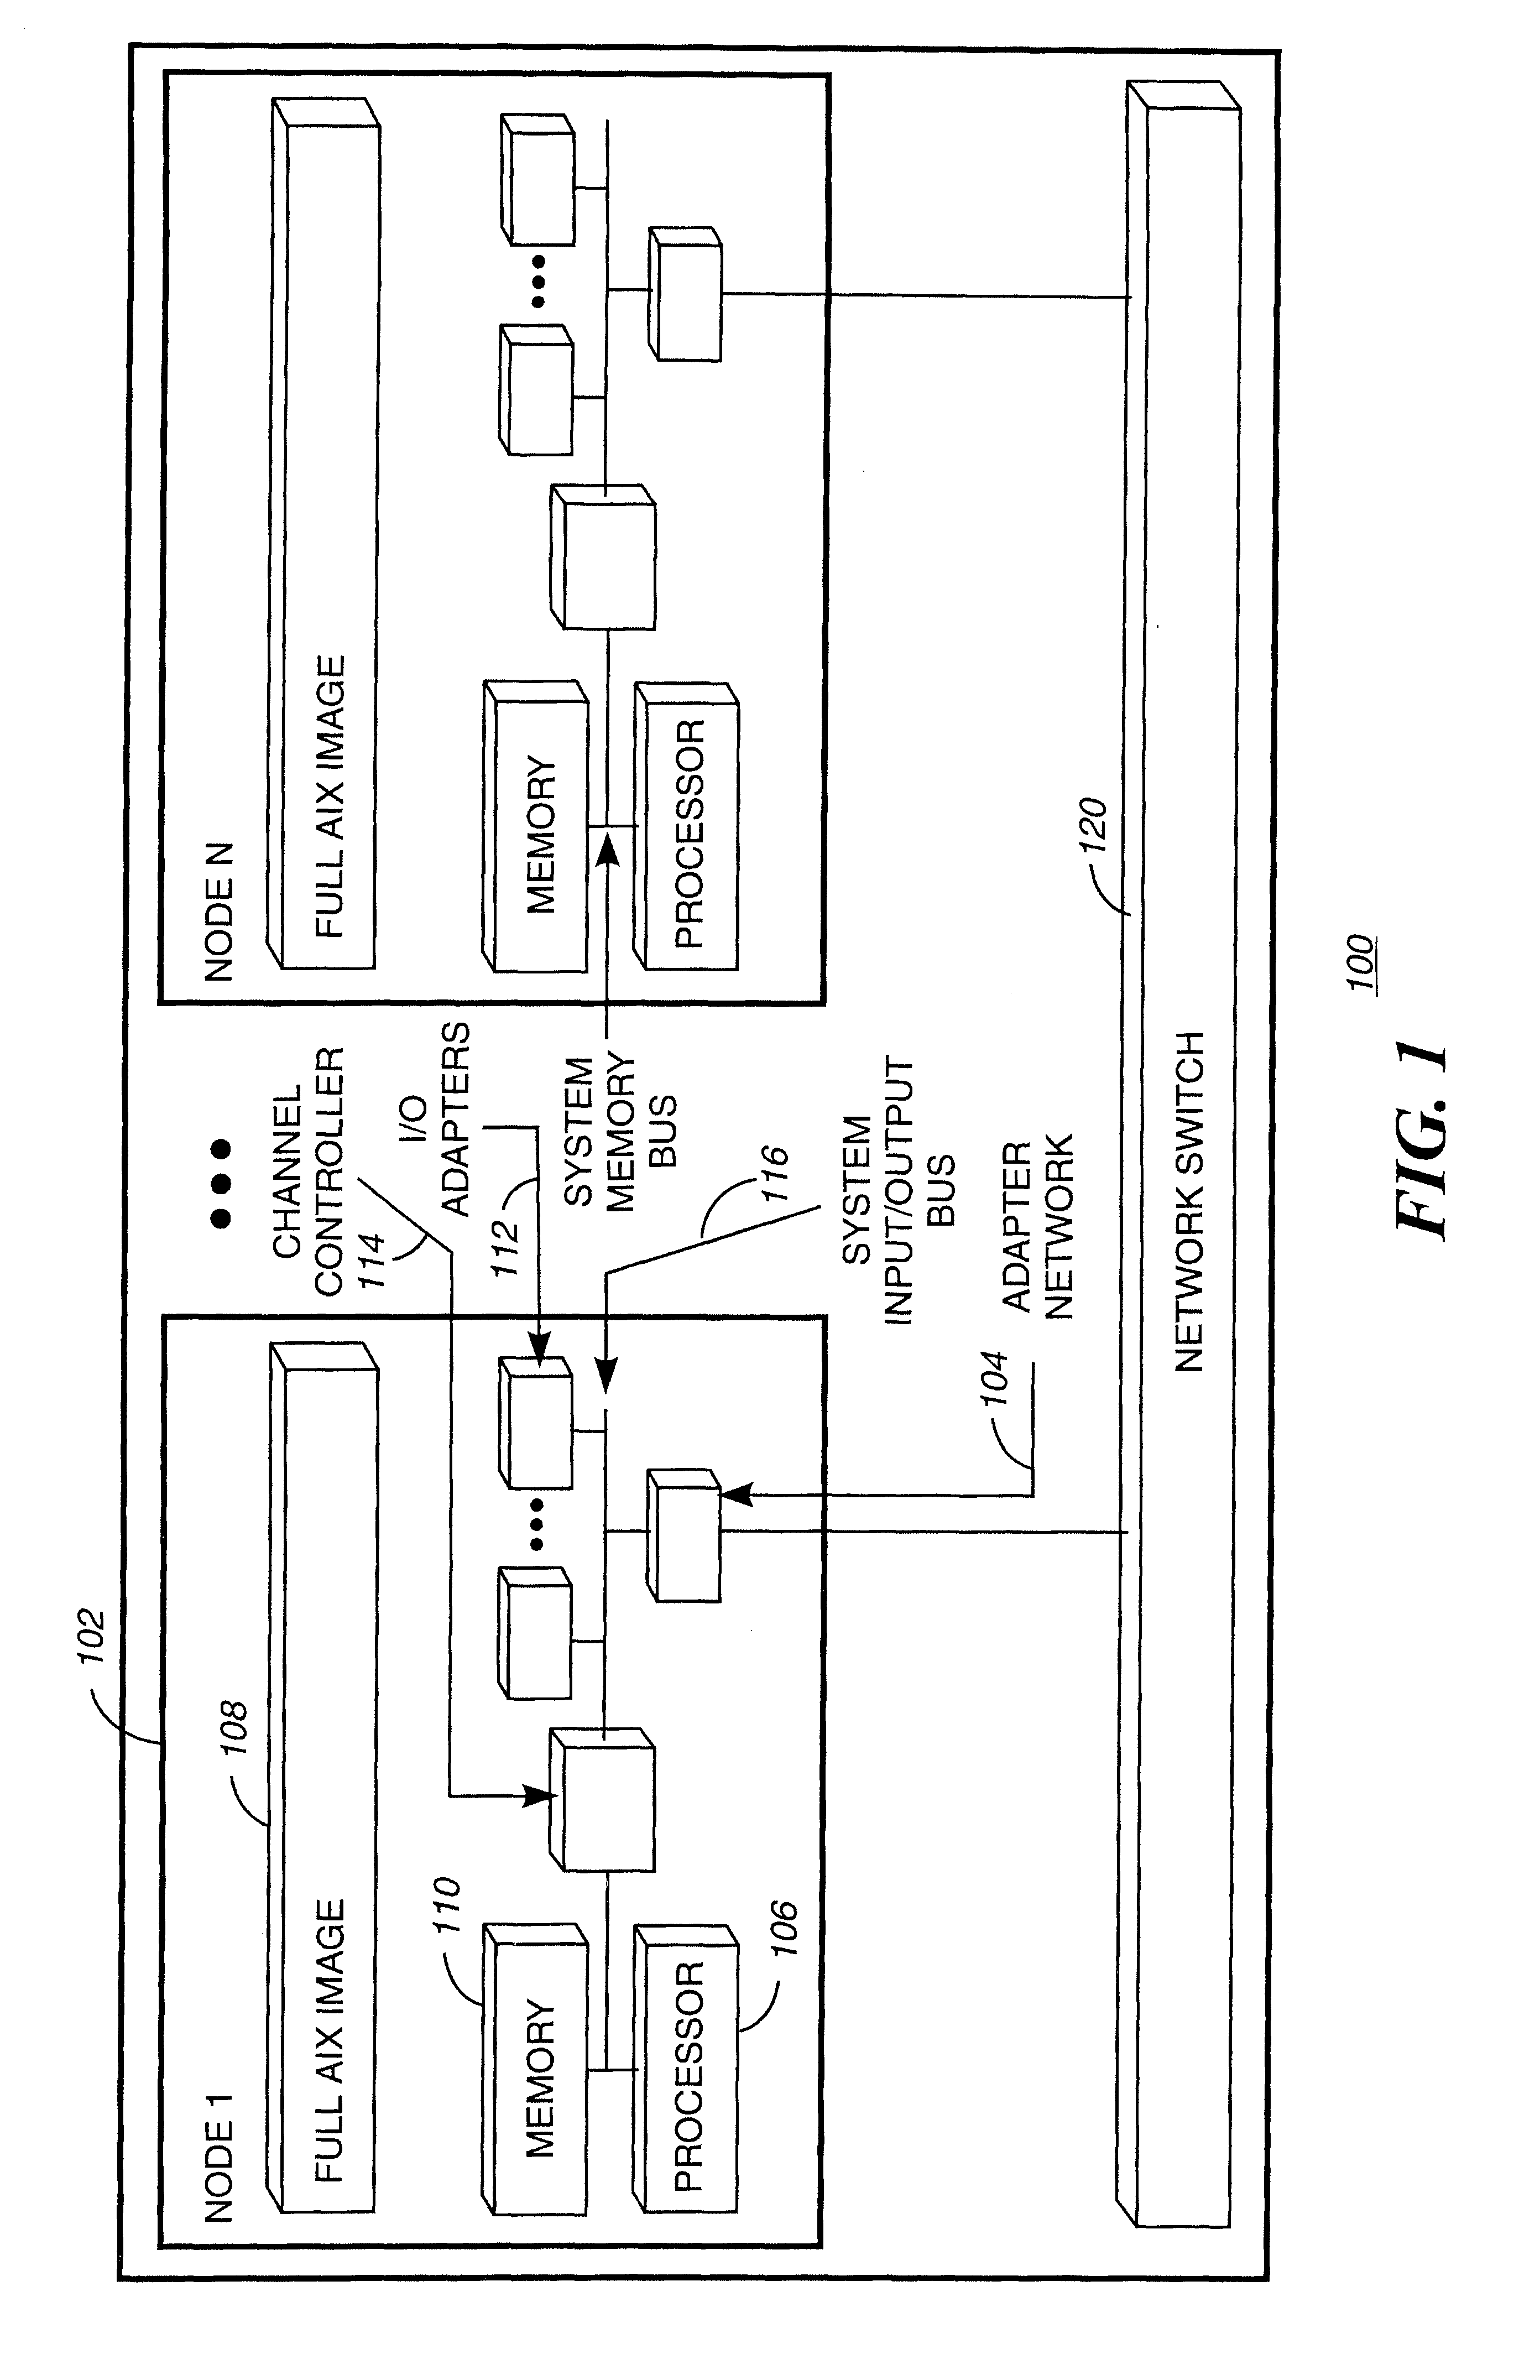 Method and apparatus for fault tolerant tunneling of multicast datagrams